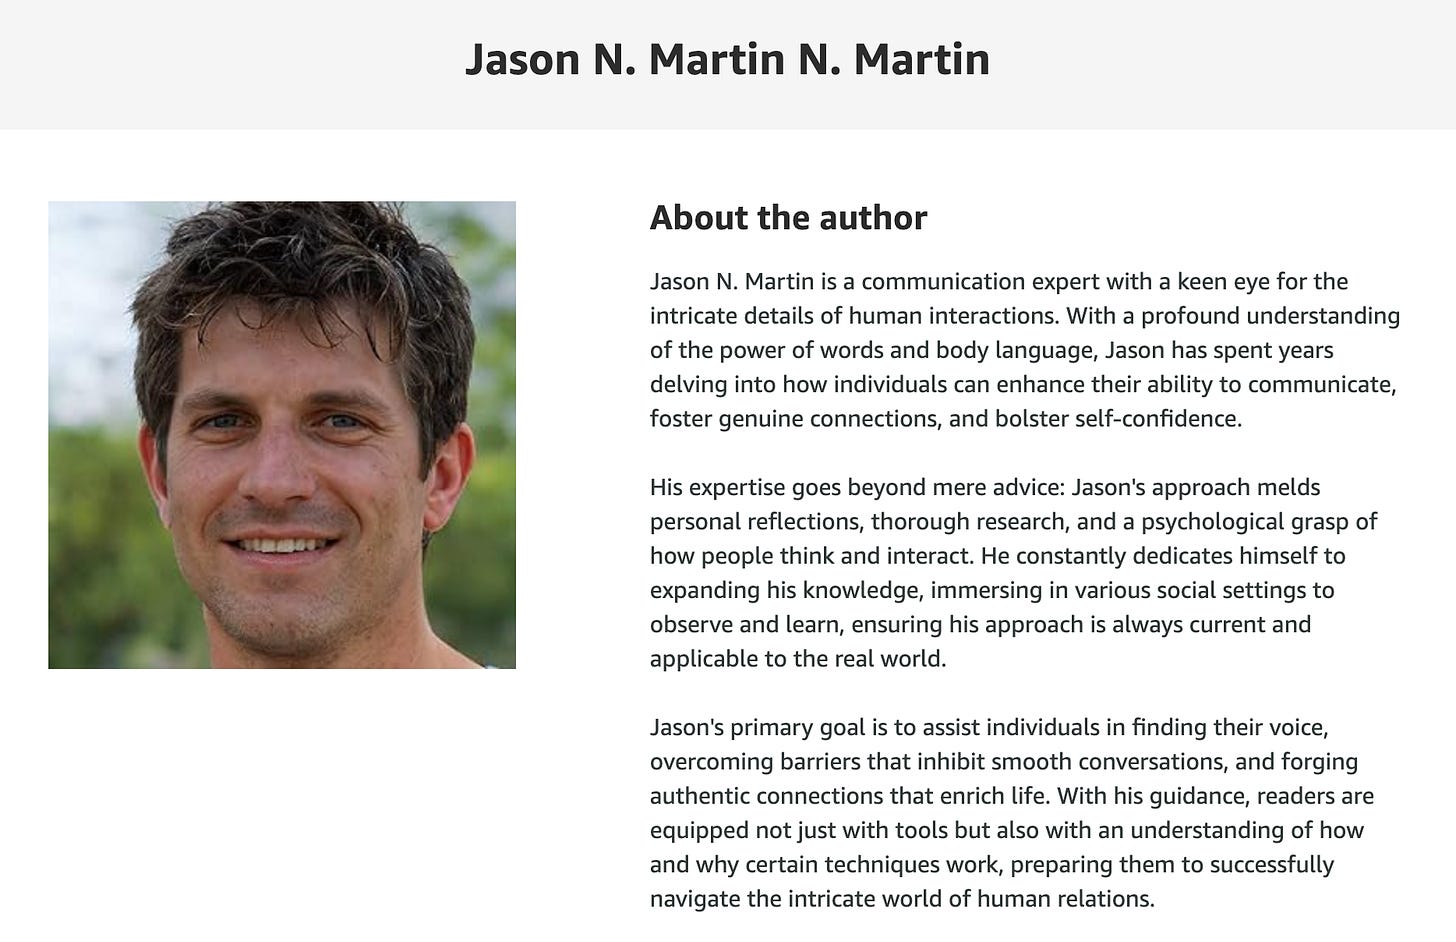 screenshot of the biography of Jason N. Martin N. Martin, an Amazon author with a GAN-generated face